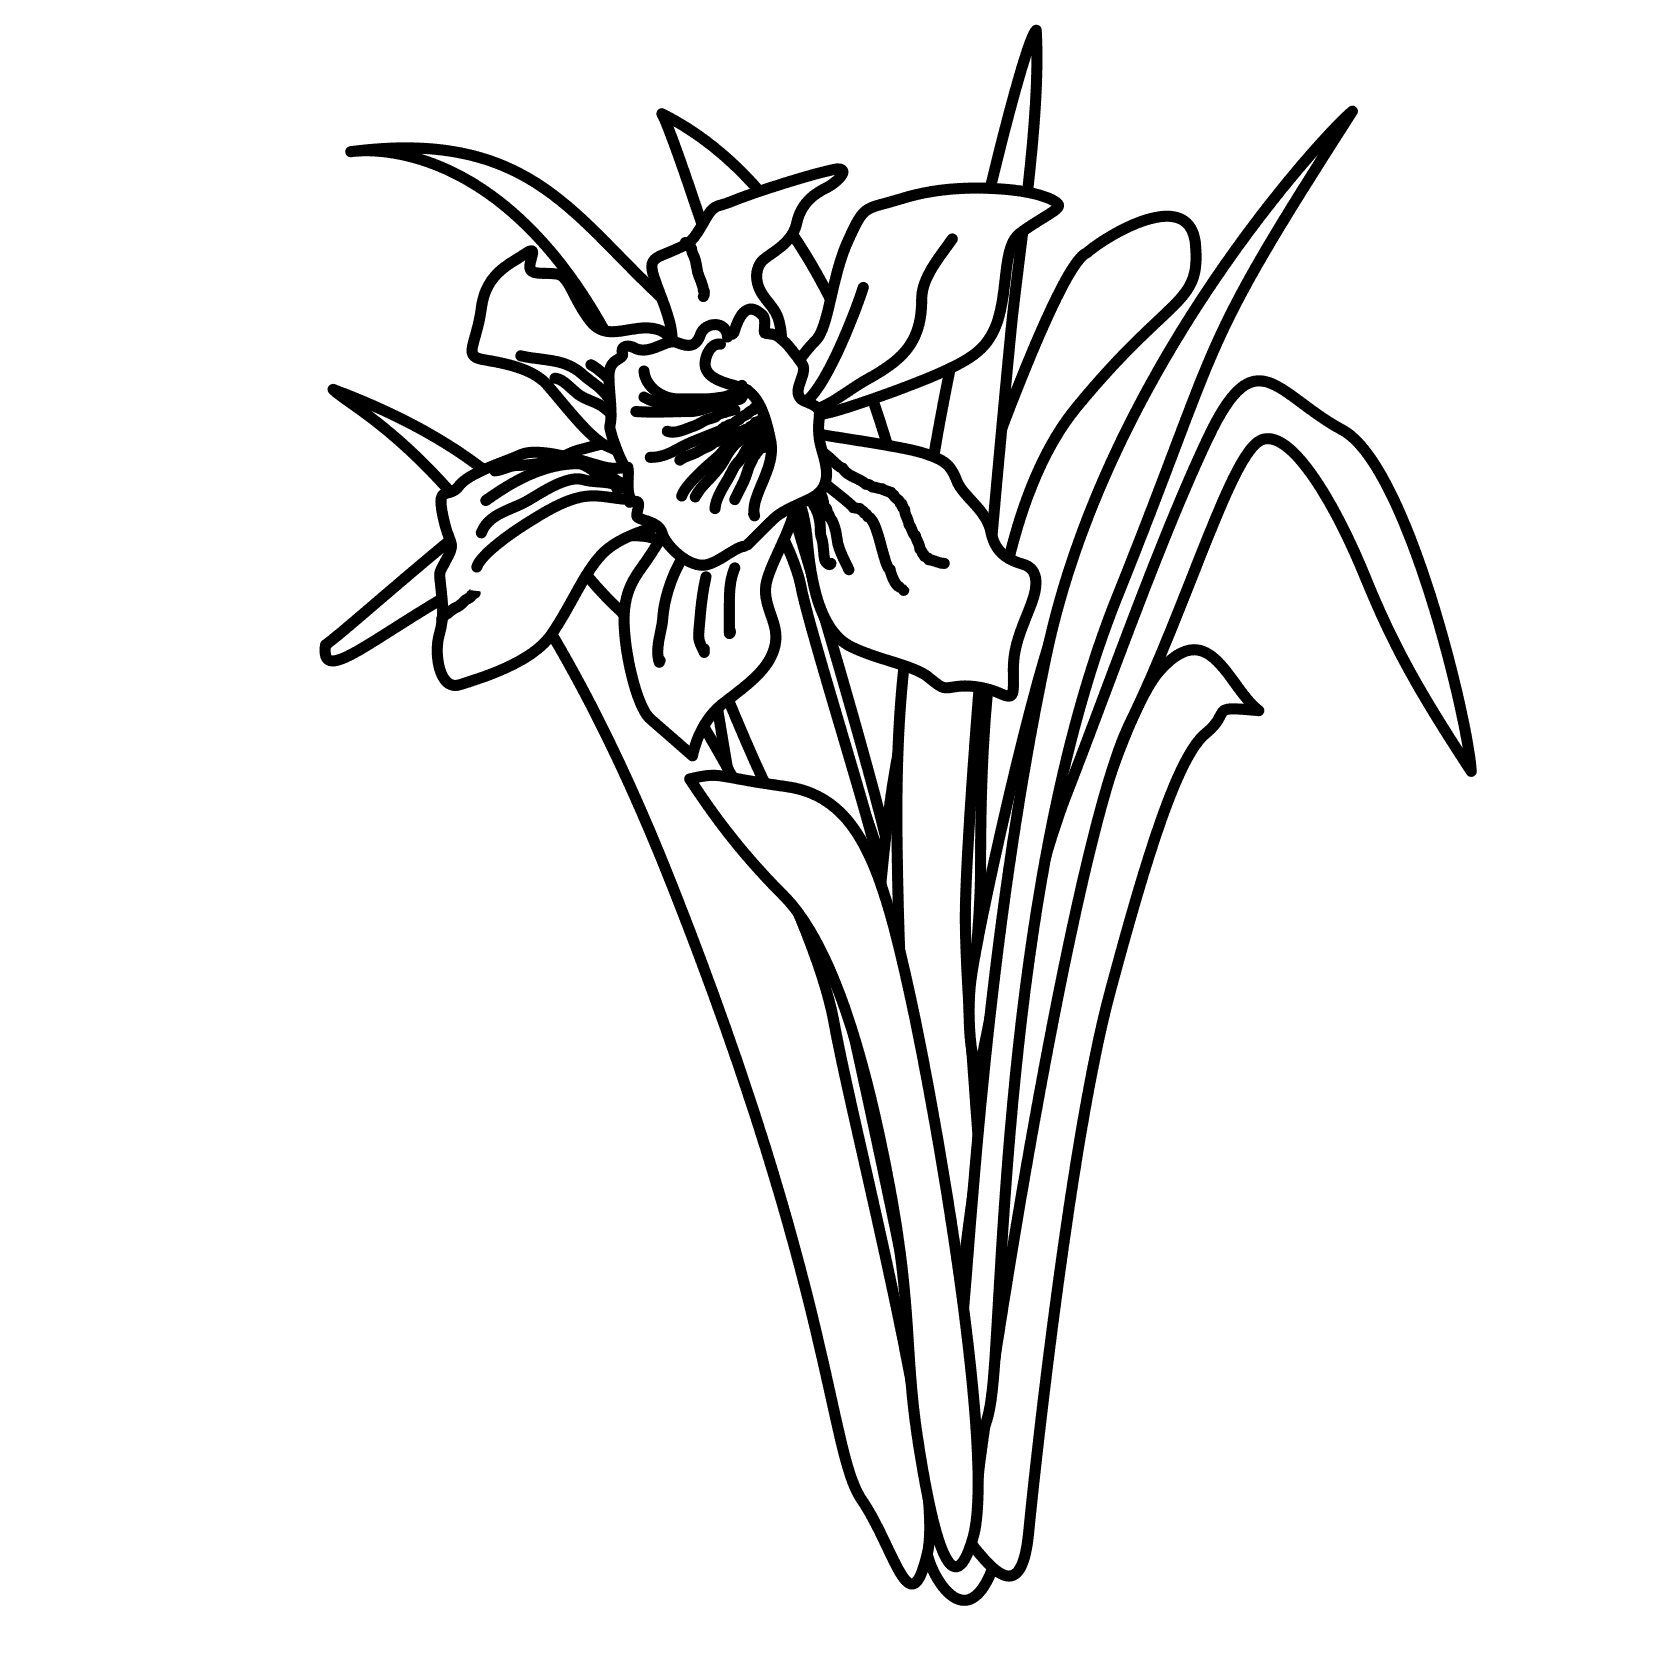 Daffodil Outline - Clipart library